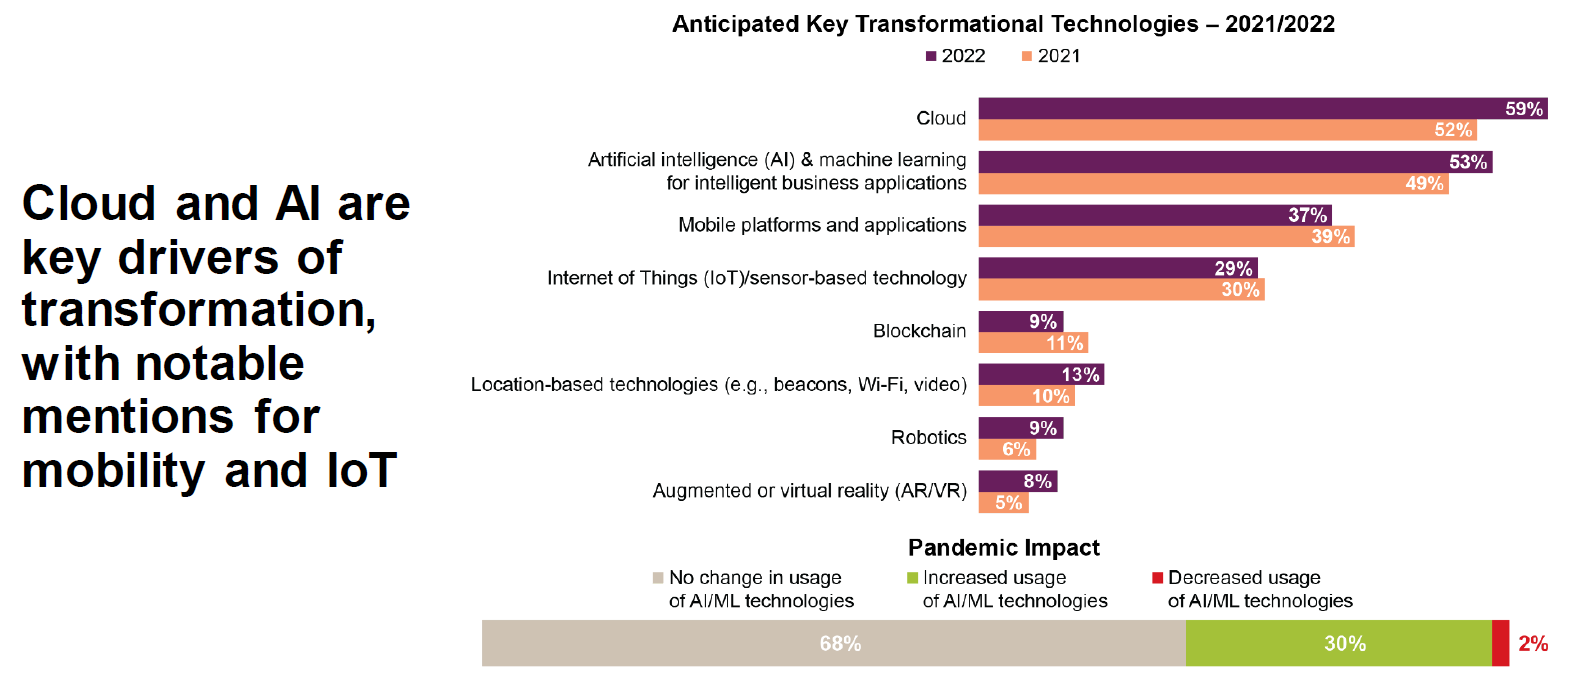 Cloud and AI are key drivers of transformation, with notable mentions for mobility and IoT